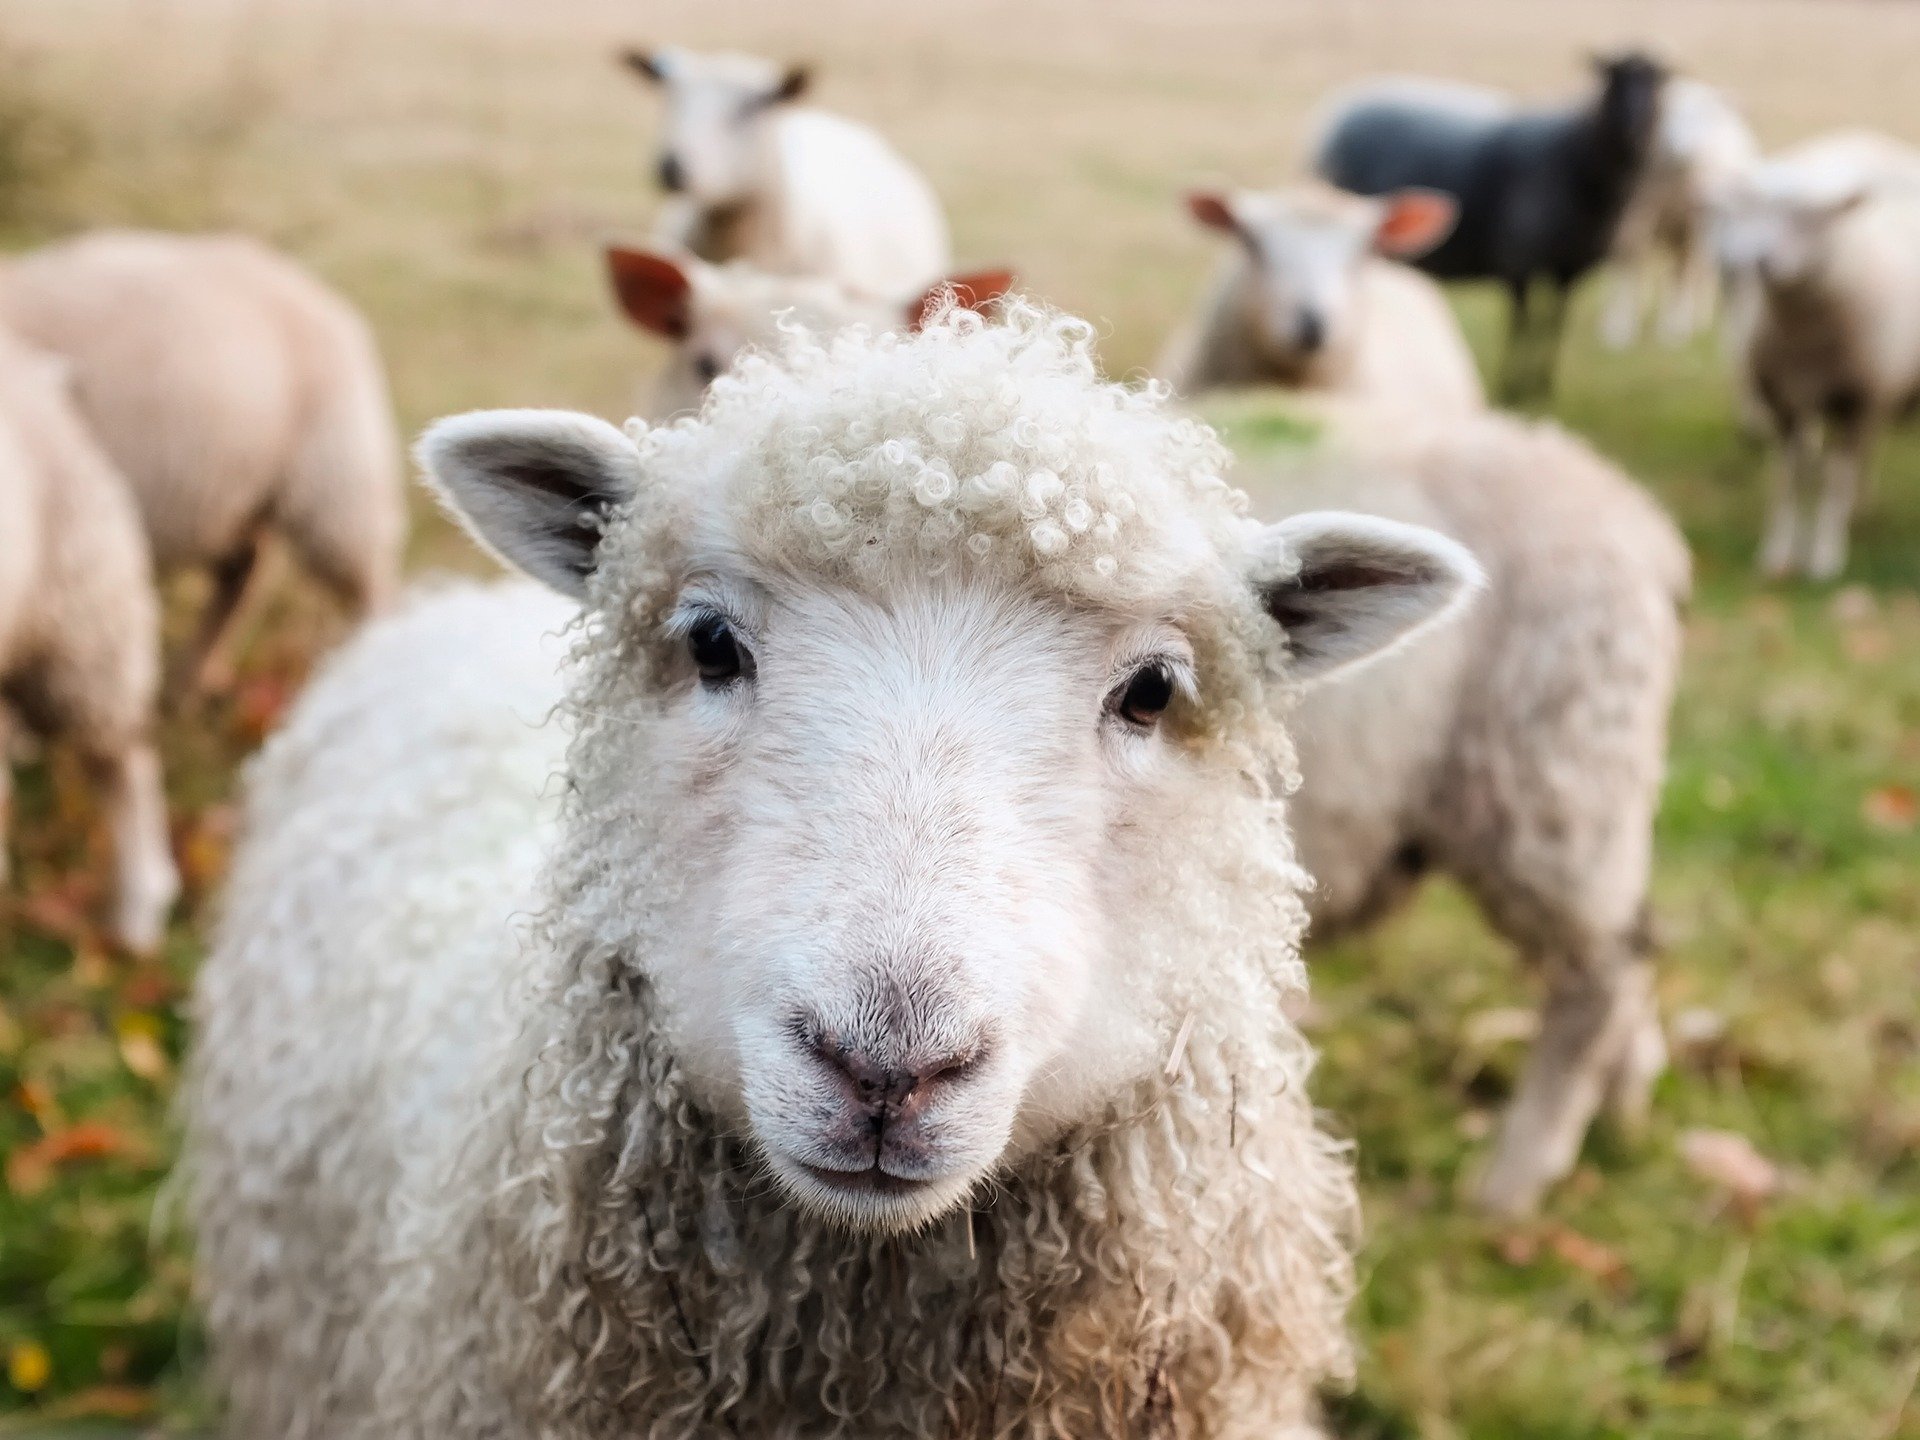 A sheep, looking directly at the camera, stood in a field.